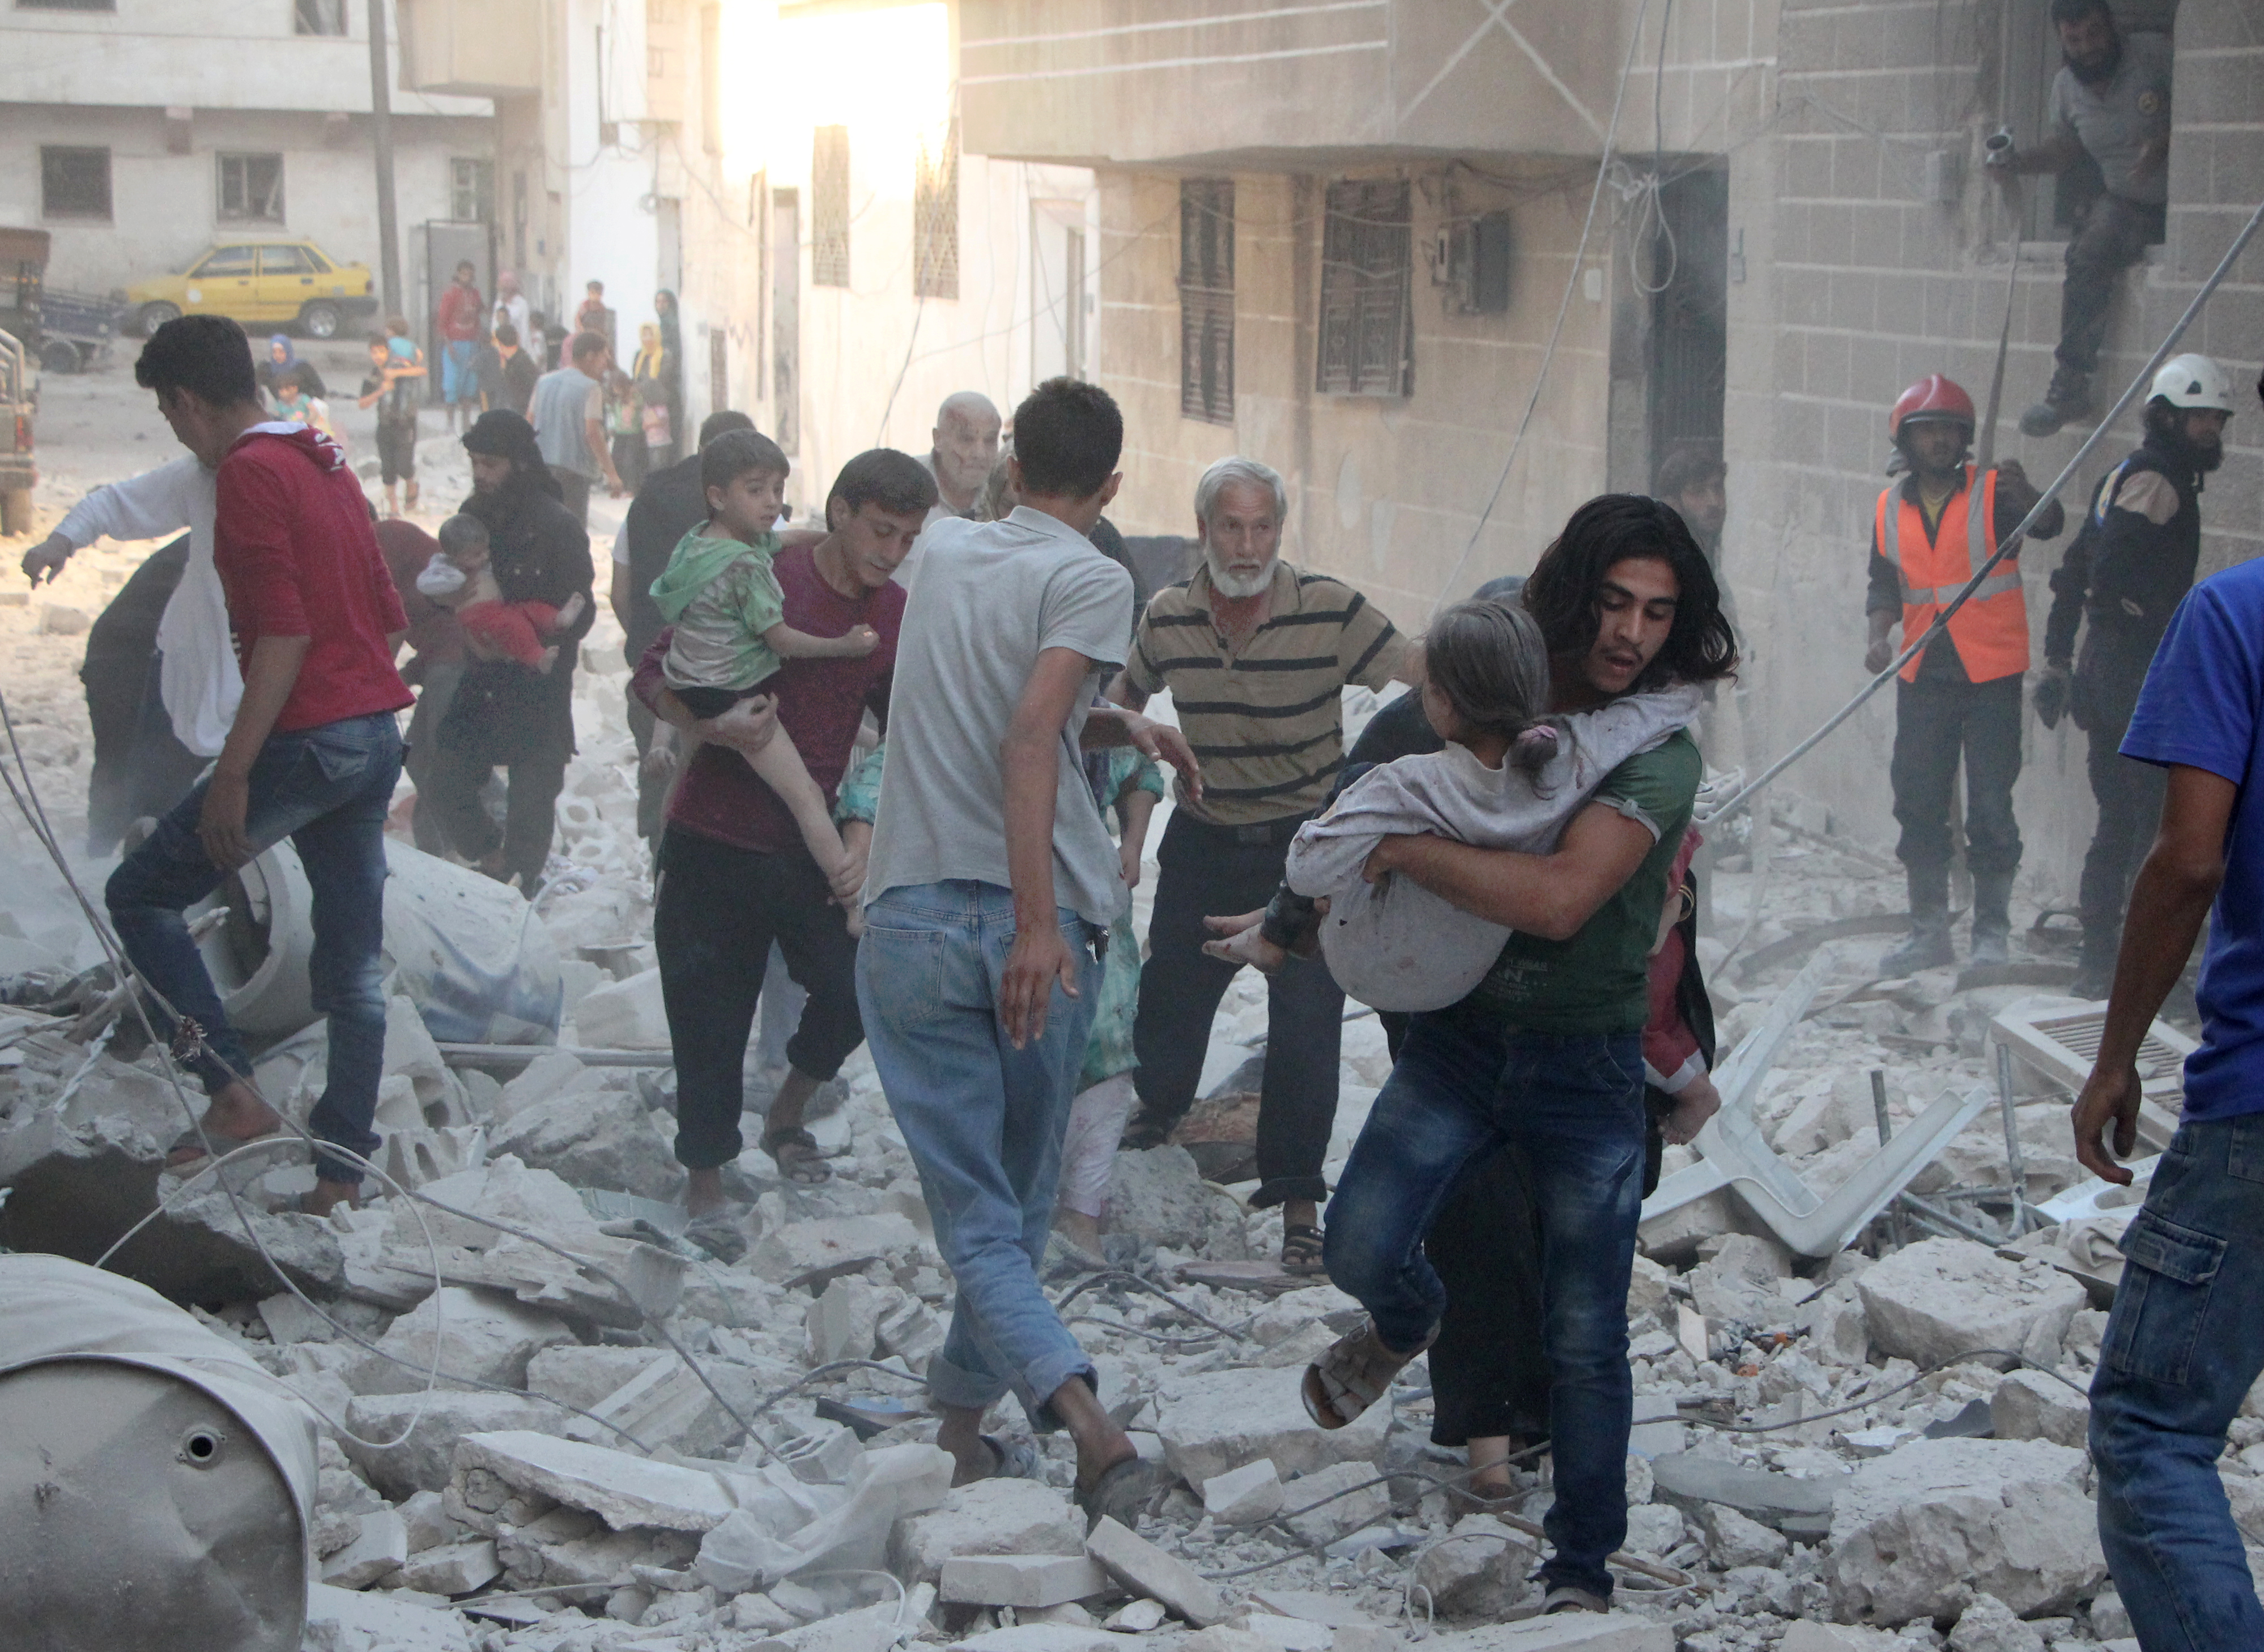 Syrian men carry injured people amid the rubble of destroyed buildings following a reported air strike on the rebel-held northwestern city of Idlib on September 29, 2016. In a statement the Syrian Observatory for Human Rights said that at least five air strikes hit various areas in the city of Idlib. / AFP PHOTO / Omar haj kadour